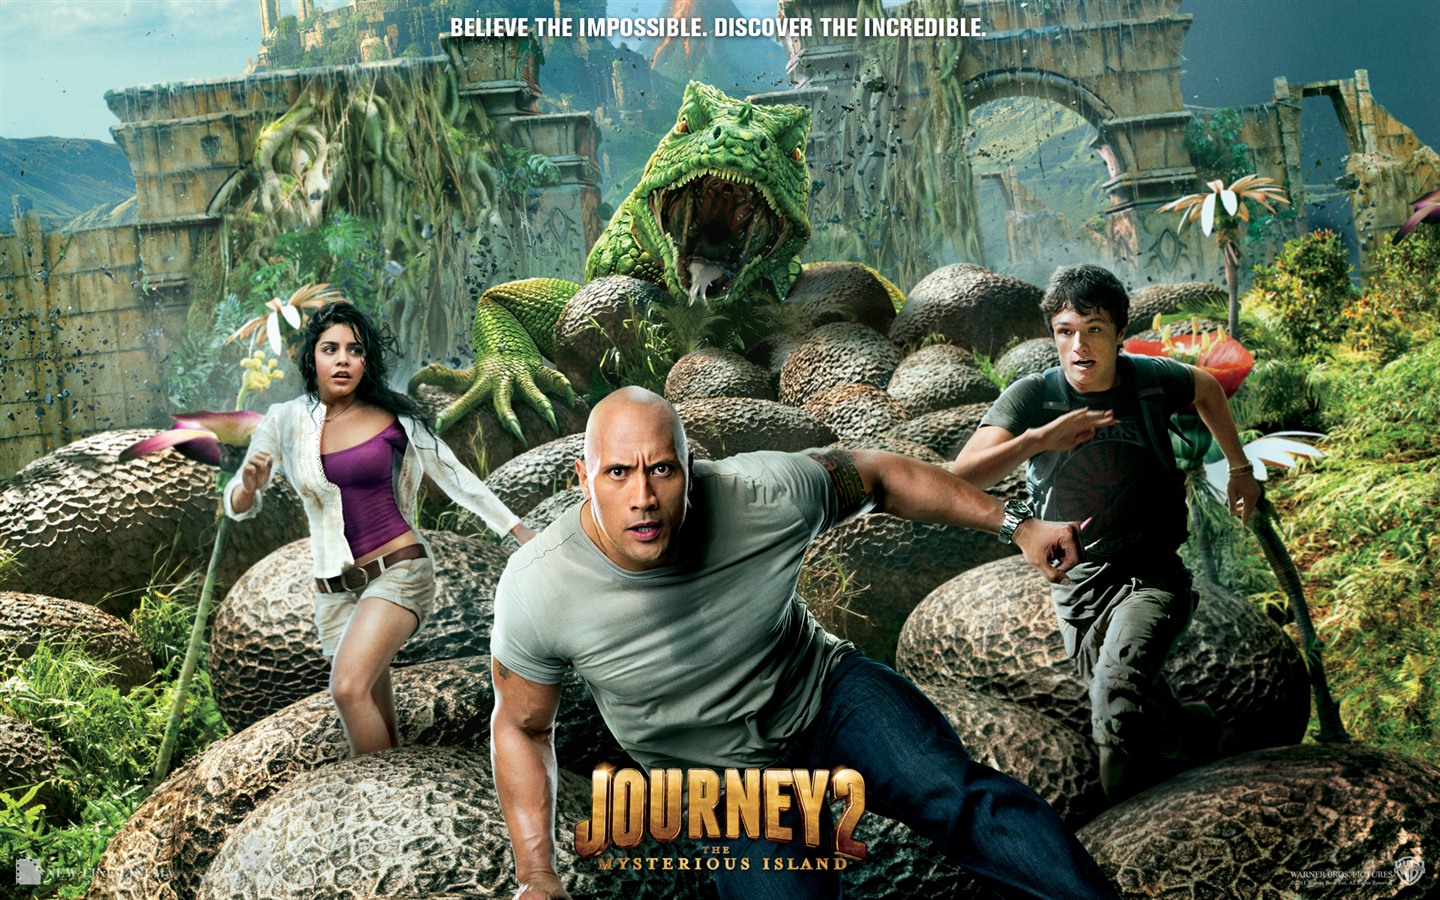 Journey 2: The Mysterious Island HD Wallpaper #1 - 1440x900